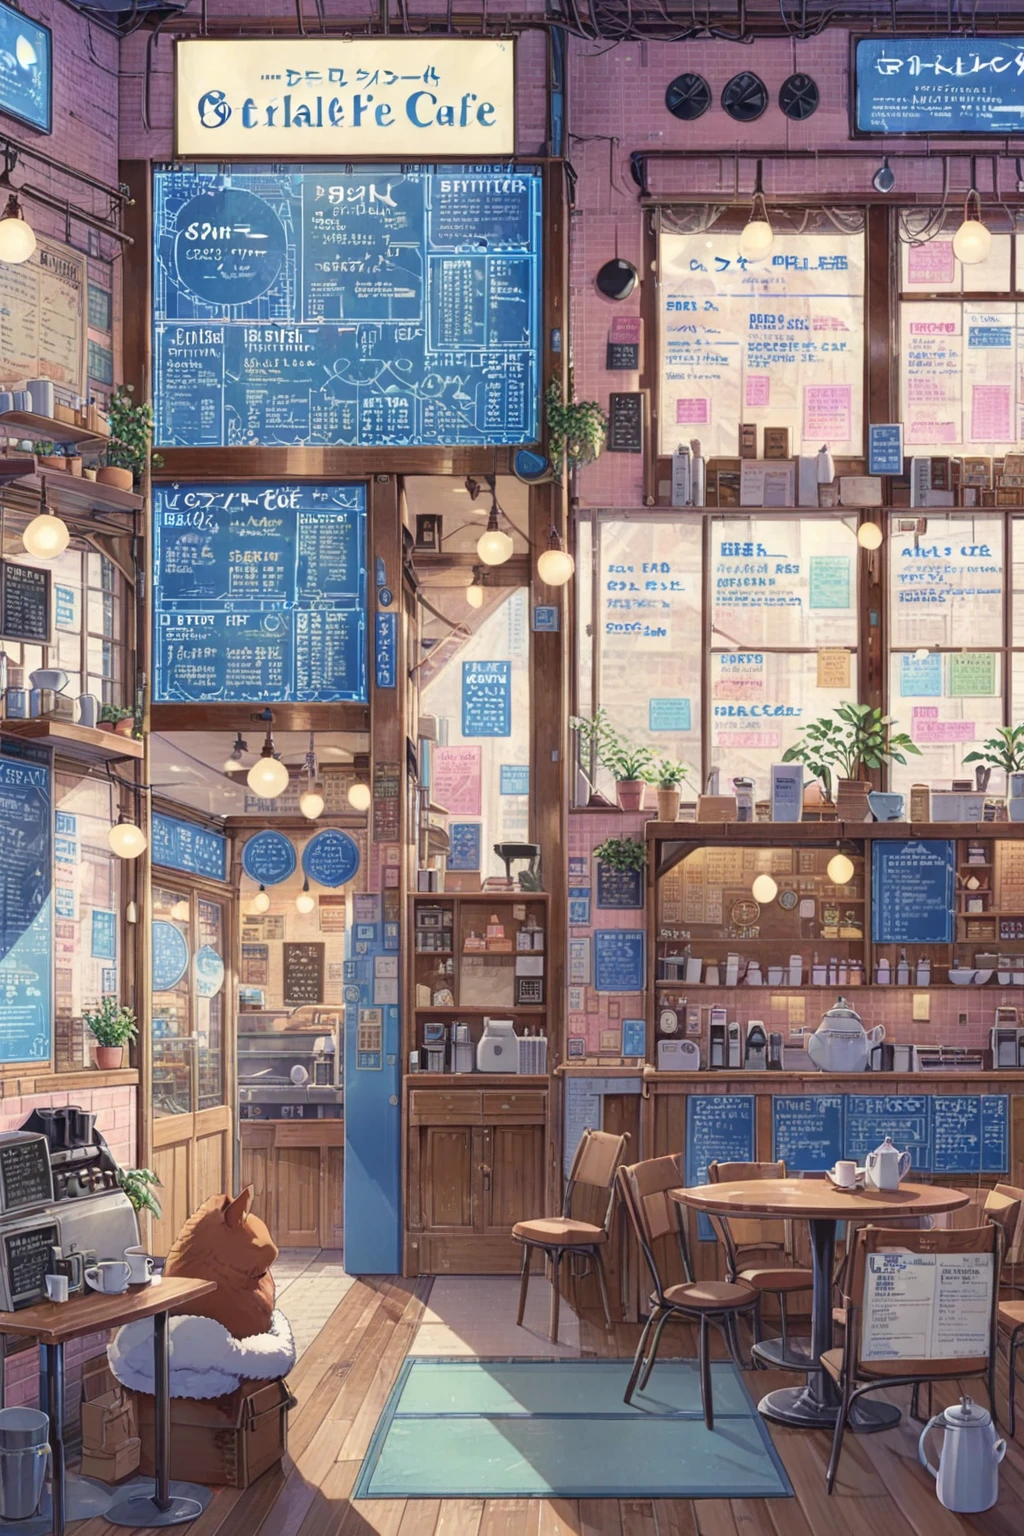 ON PARCHMENT,INK ILLUSTRATION, ((anime:1.4,illustration)),(masterpiece, top quality, best quality),(ultra-detailed, absolutely resolution),((16k, high res)), (((A detailed blueprint of the section of Lofi cafe, a fairytale-style cafe, detailed labeling text, grid lines,)) ((cozy lofi illustration:1.4)), ((anime:1.4, illustration)),(masterpiece, top quality, best quality),(ultra-detailed, absolutely resolution),((16k, high res)) BREAK {lofi art, style of Laurie Greasley, style of Makoto Shinkai, anime aesthetic},